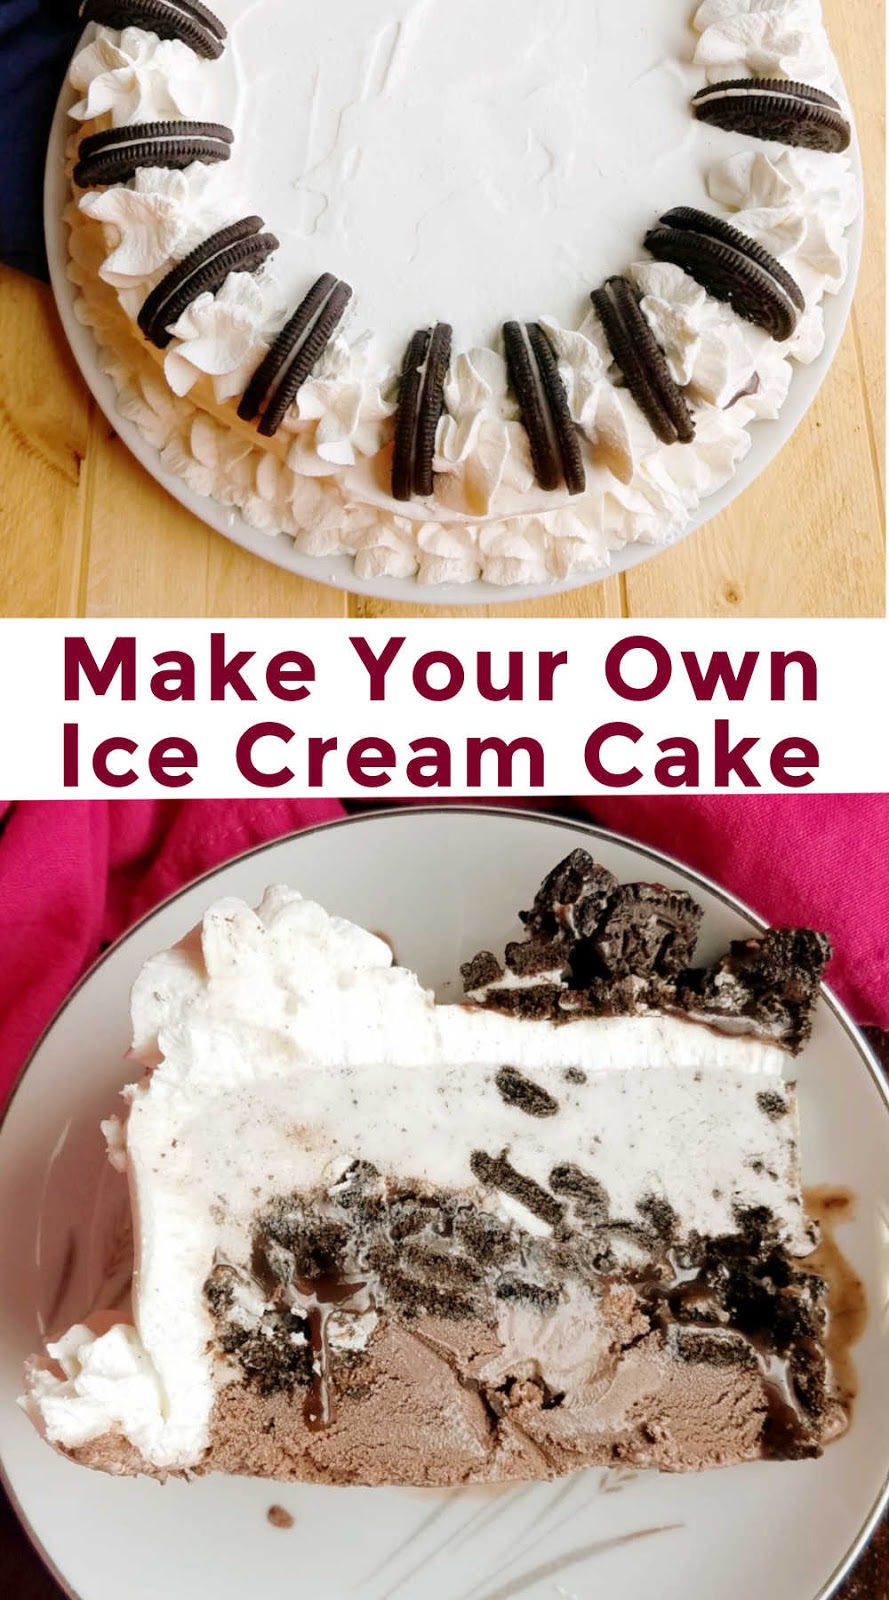 Make your own tasty chocolate crunch ice cream cake. It's an easy, fun and super delicious dessert!